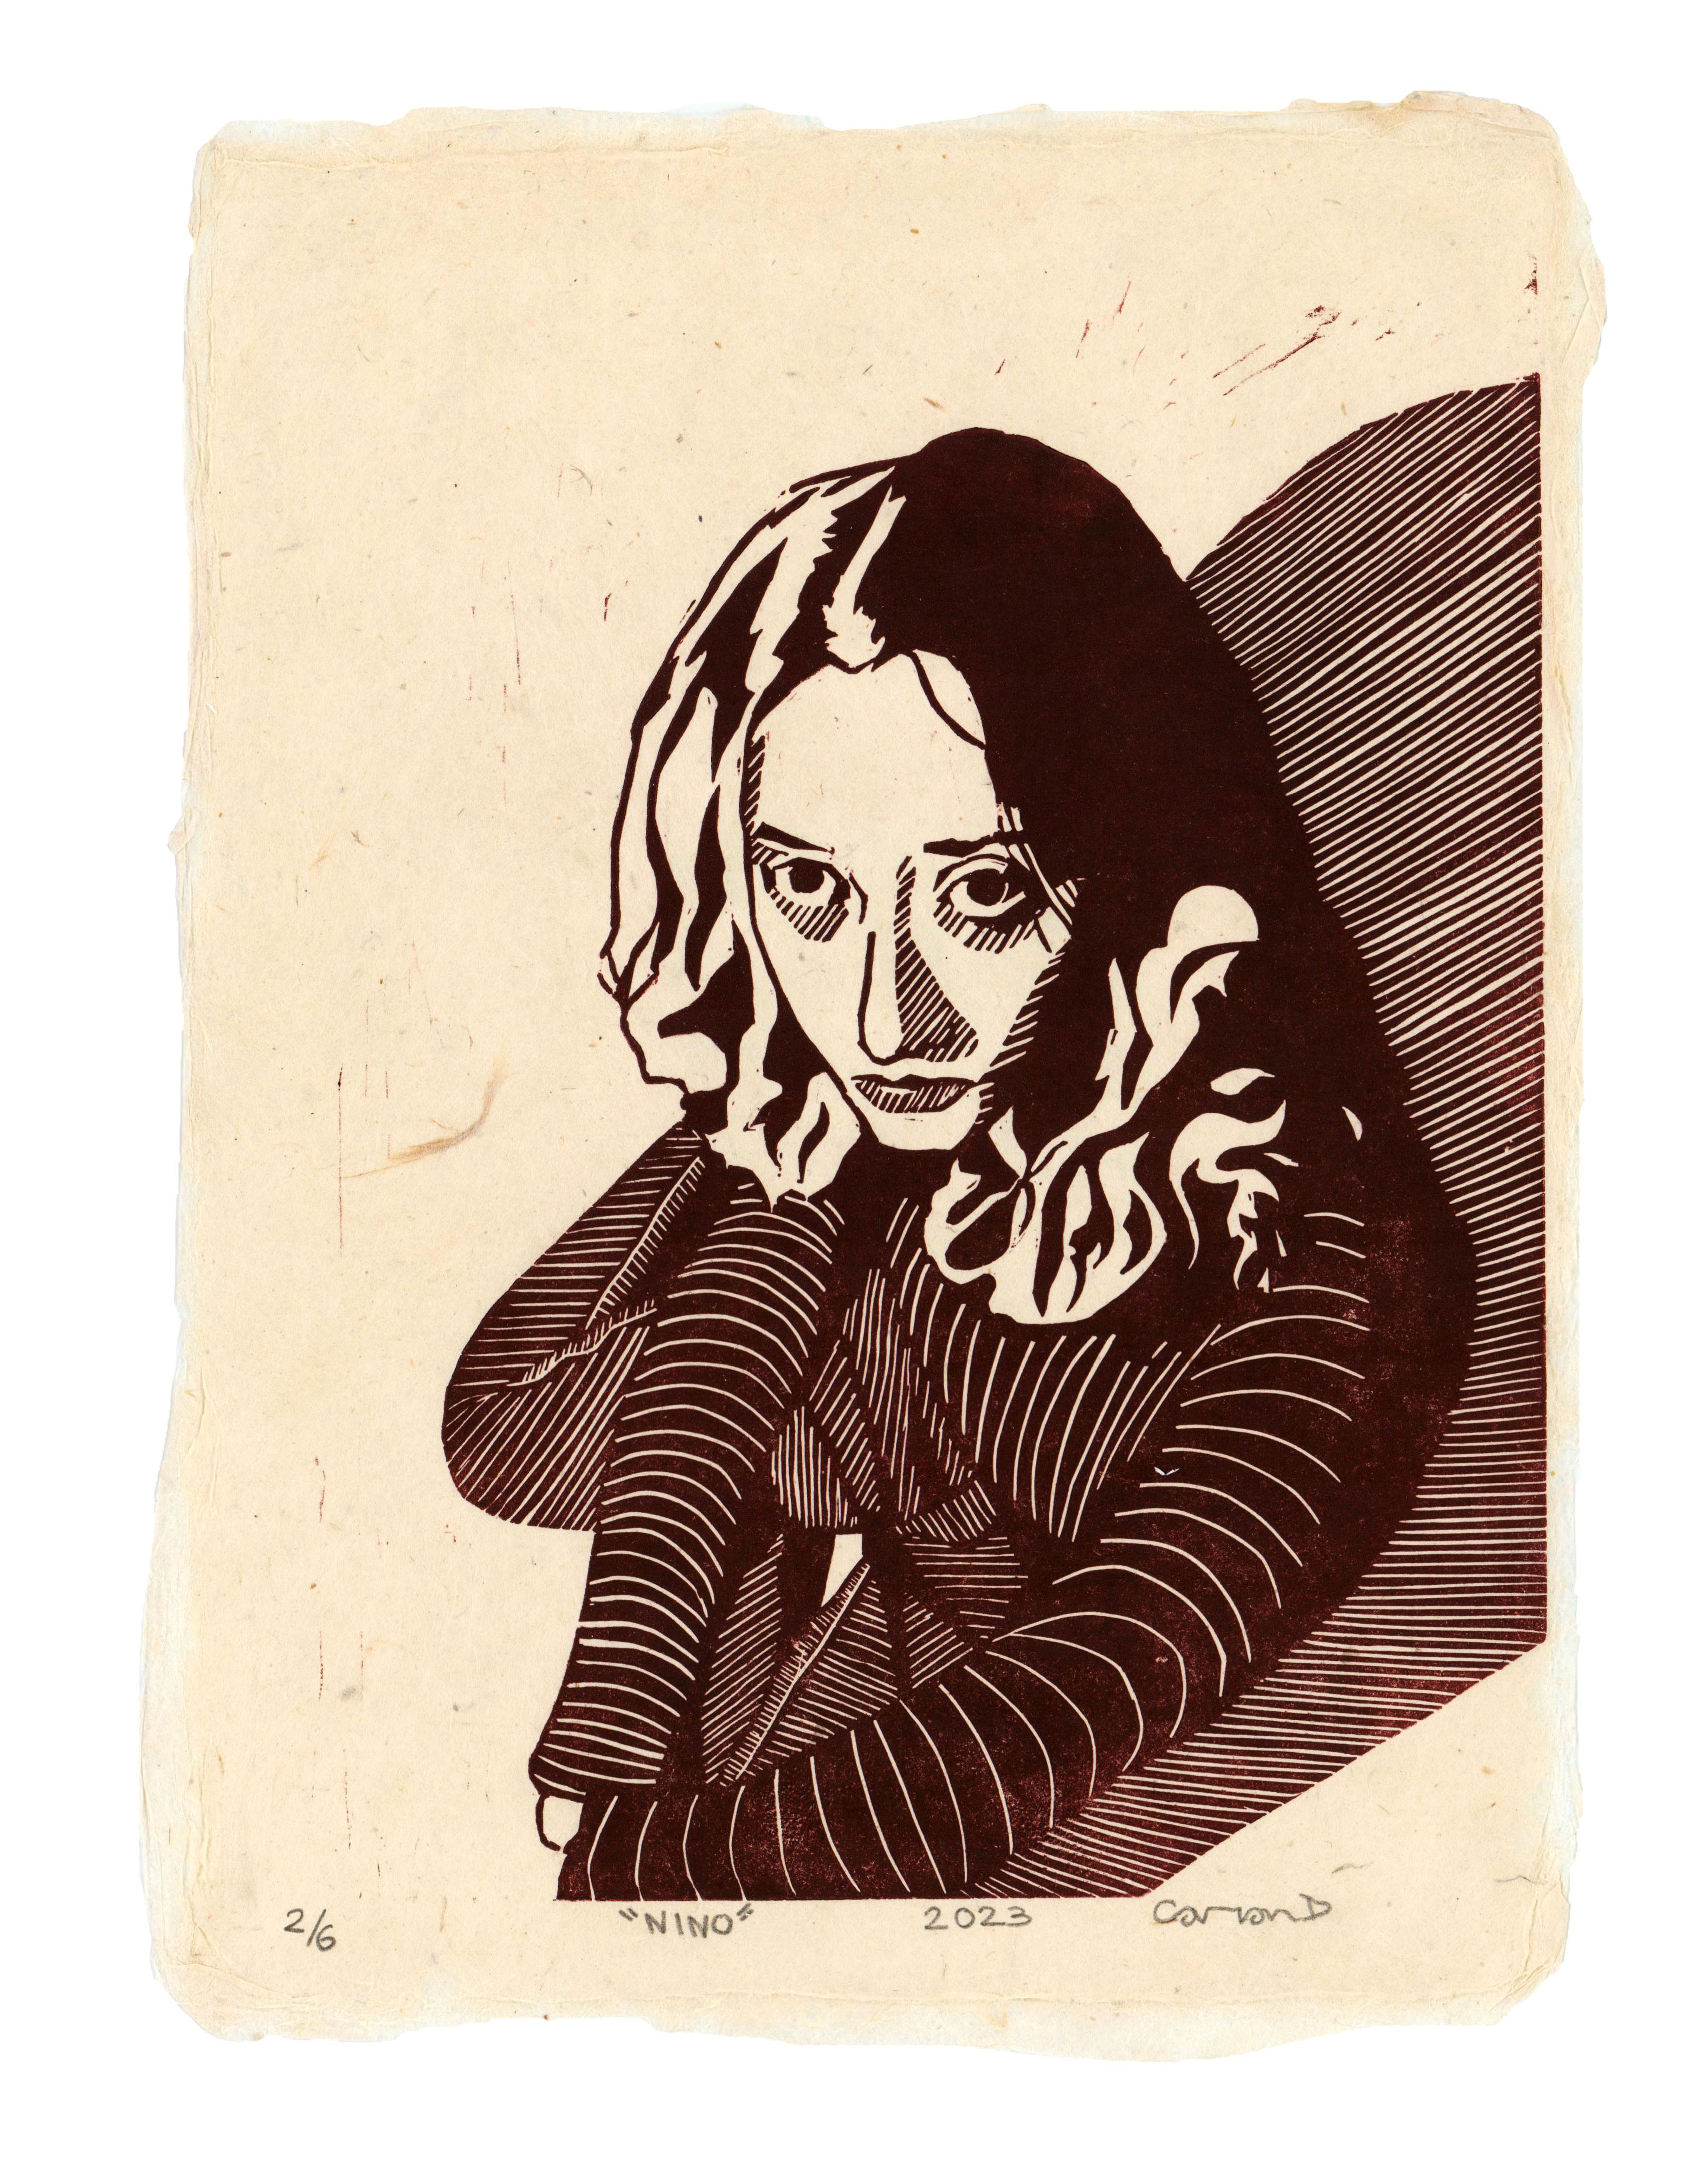 Linocut print of an adolescent girl reclining and staring upward to the left. Seen from overhead, the girl is seated and leaning with her legs tucked beneath her. She wears dark pants and a long-sleeved dark shirt with tight rows of white horizontal stripes on the chest and arms. Her hands are together and covered by her long shirt sleeves. She has long, wavy, shoulder-length hair, and a long, crosshatched shadow extends behind her entire body to the right. Beneath the illustration are the words 2/6, "Nino," 2023, and Cameron D.